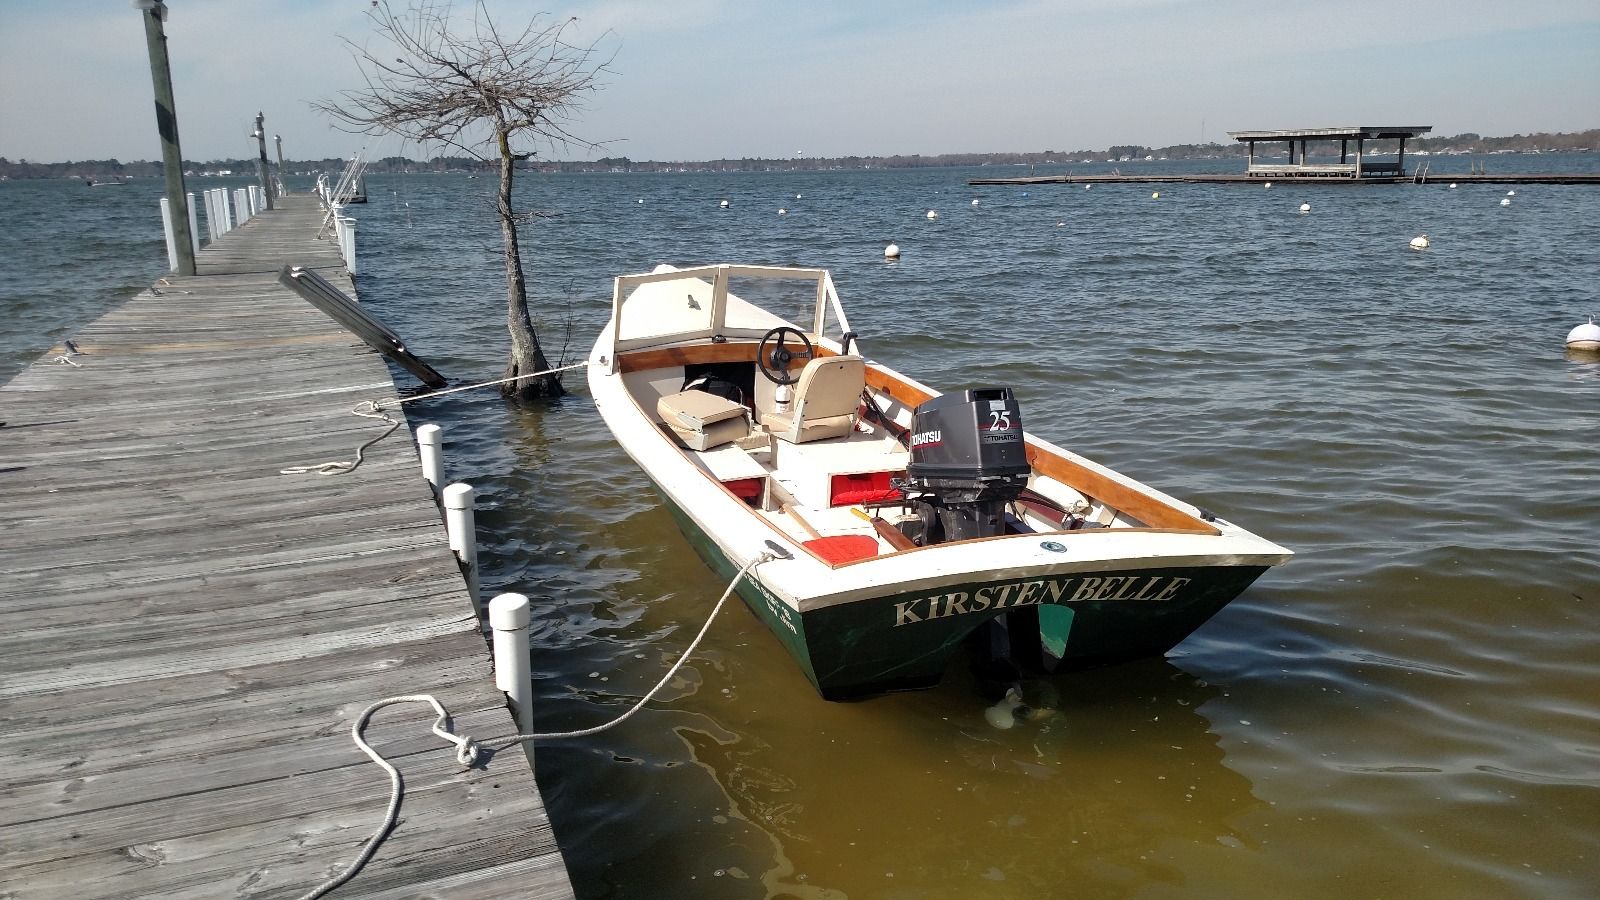 simmons sea skiff 2000 for sale for $4,000 - boats-from